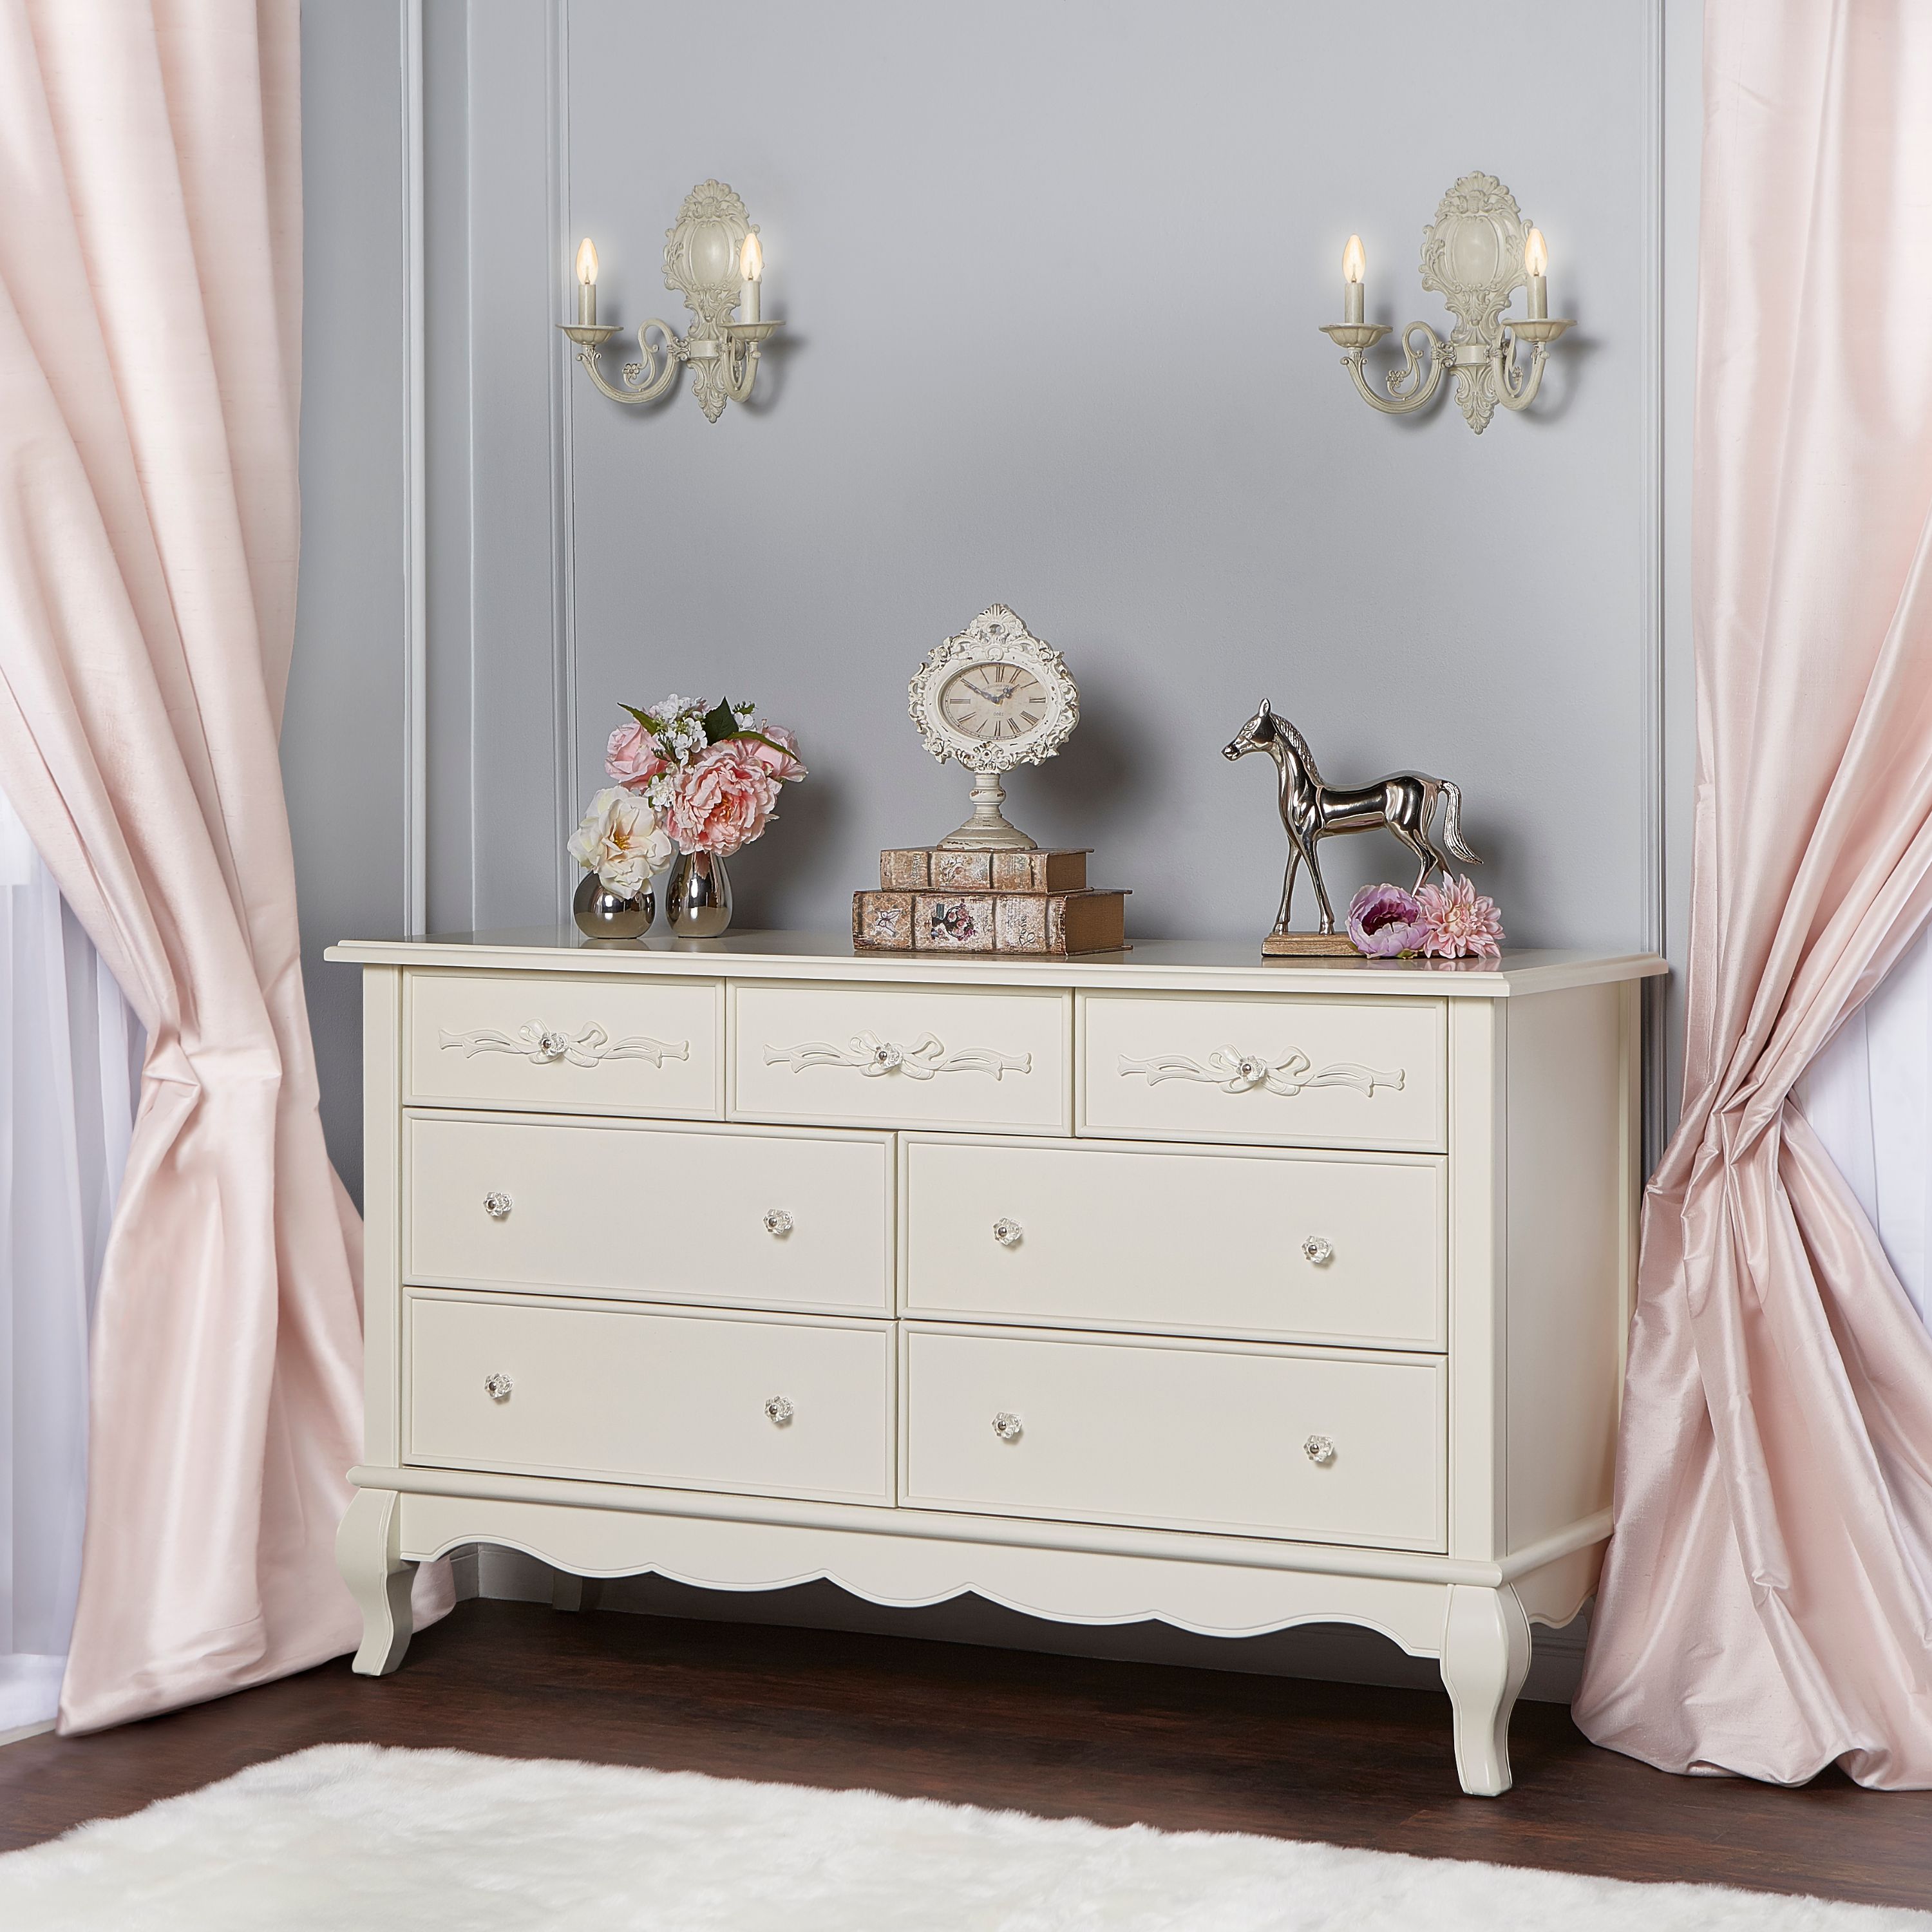 Evolur Aurora 7-Drawer Double Dresser, Ivory Lace, Spacious Drawers, classic - image 2 of 9